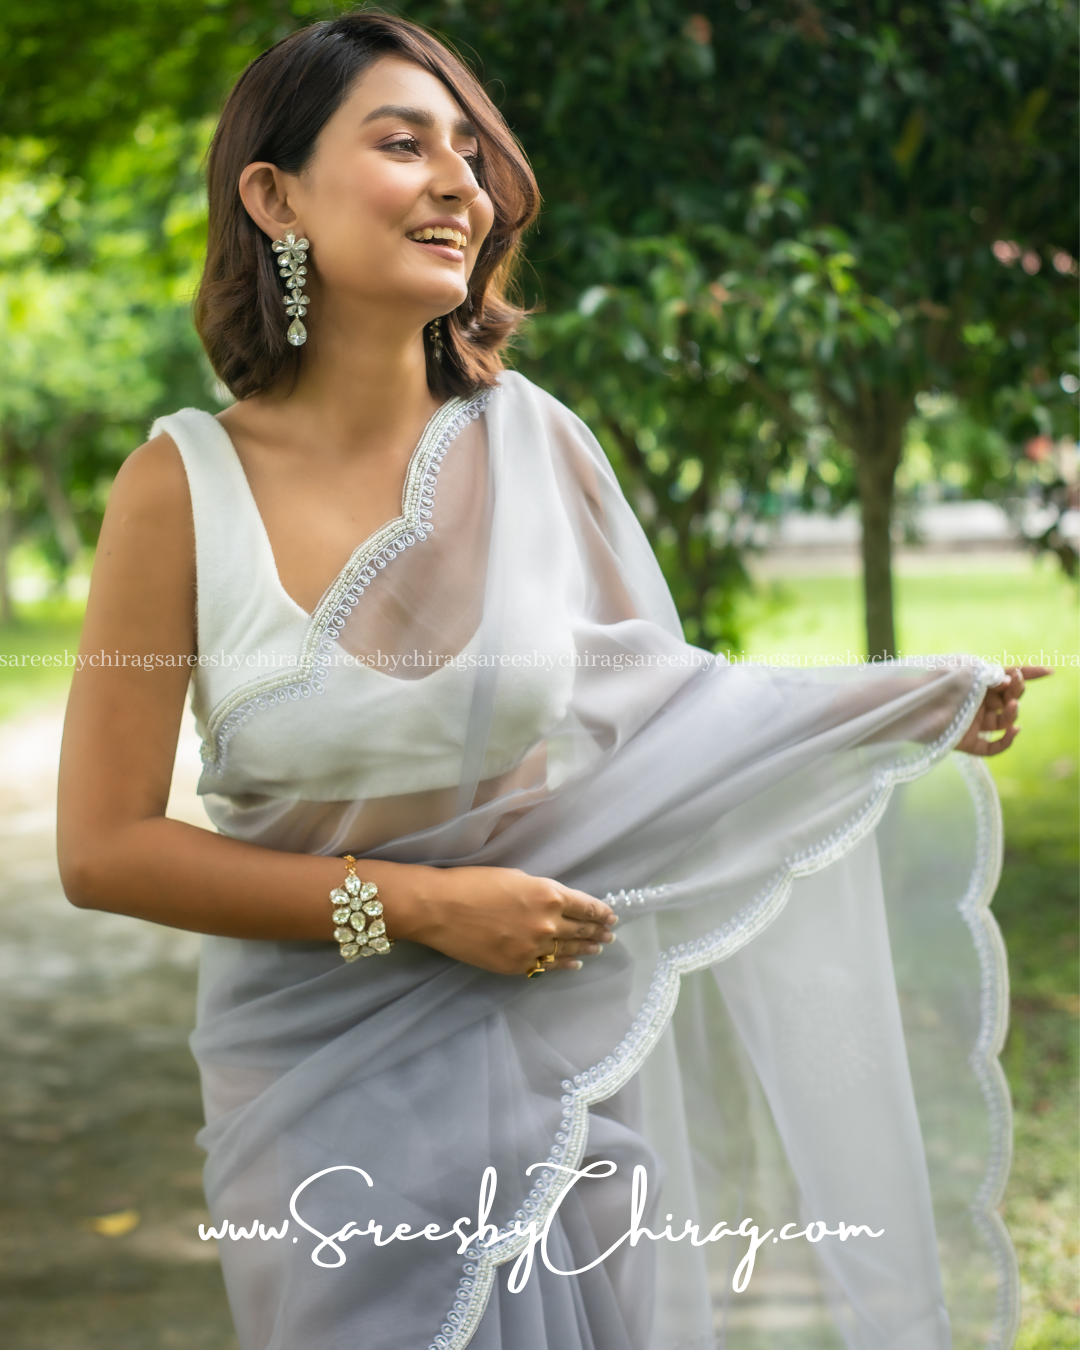 Grey Organza Saree with Exquisite Hand-Cutwork Border and Pearl Embellishments - Anika